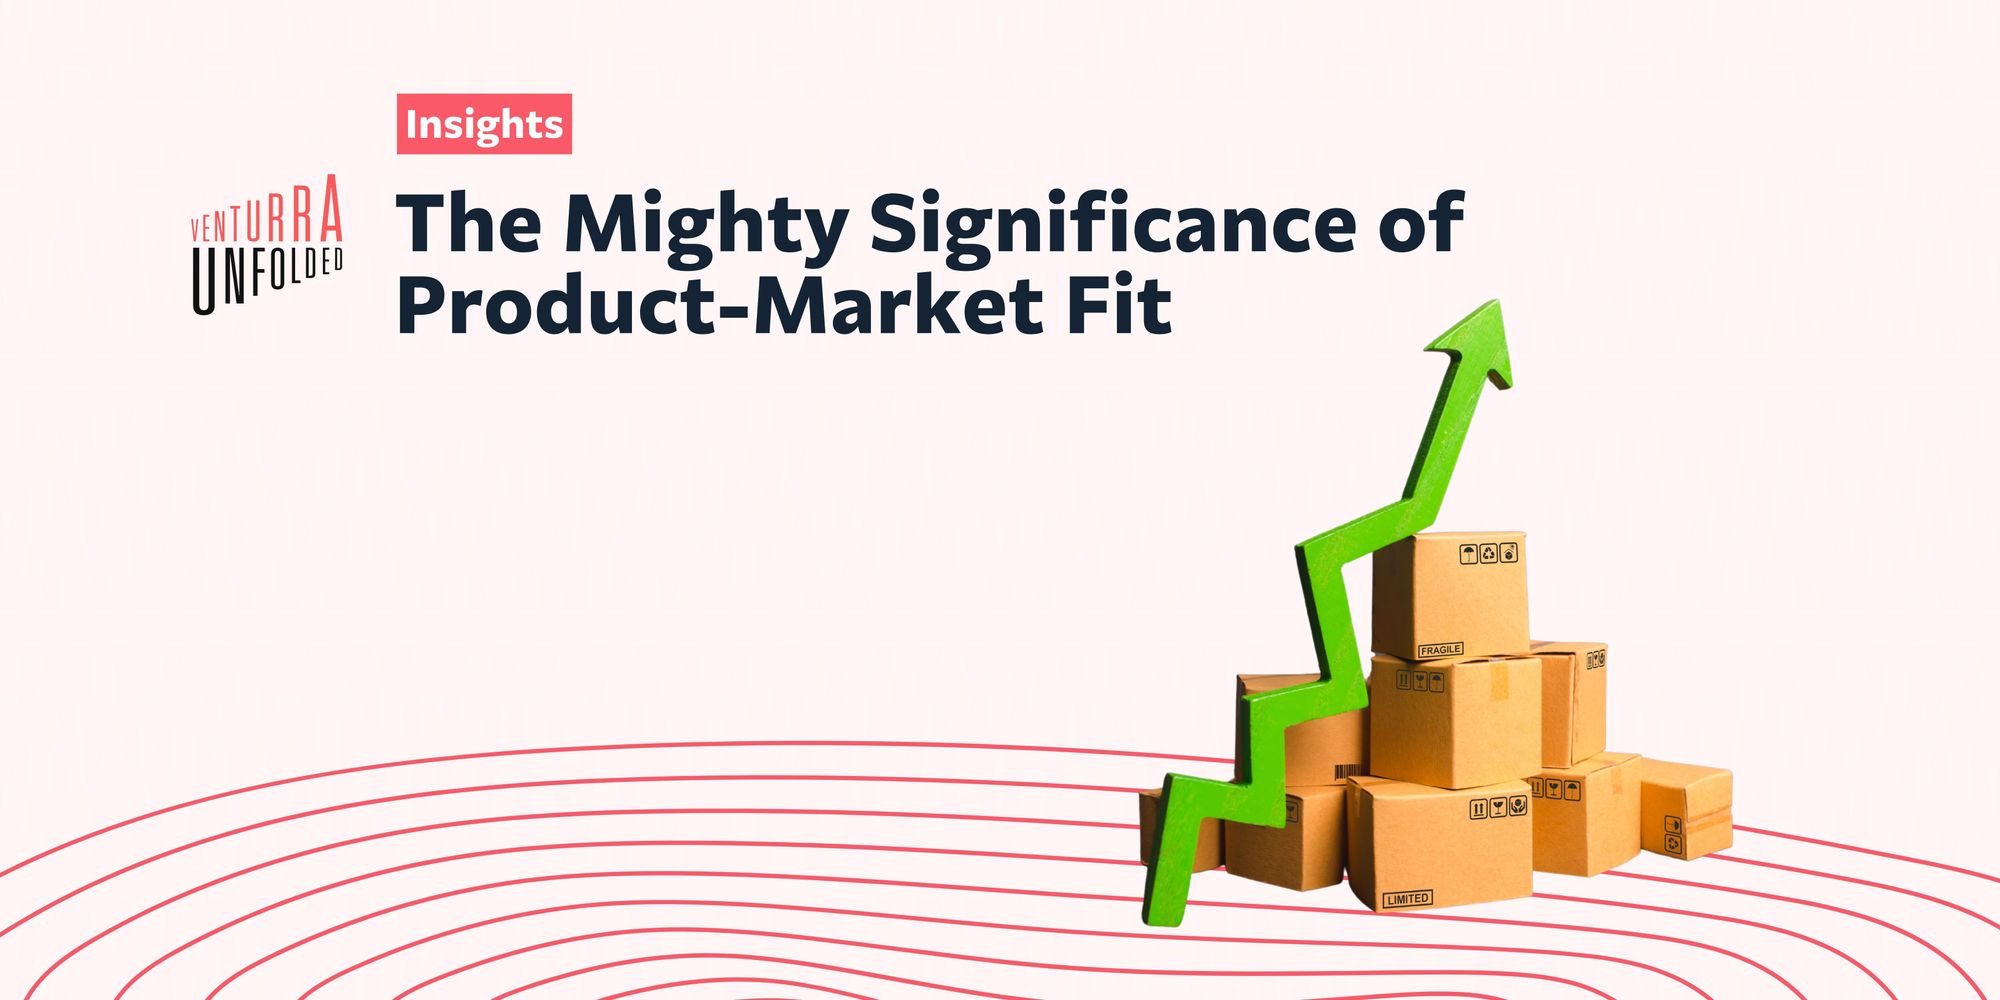 The Mighty Significance of Product-Market Fit